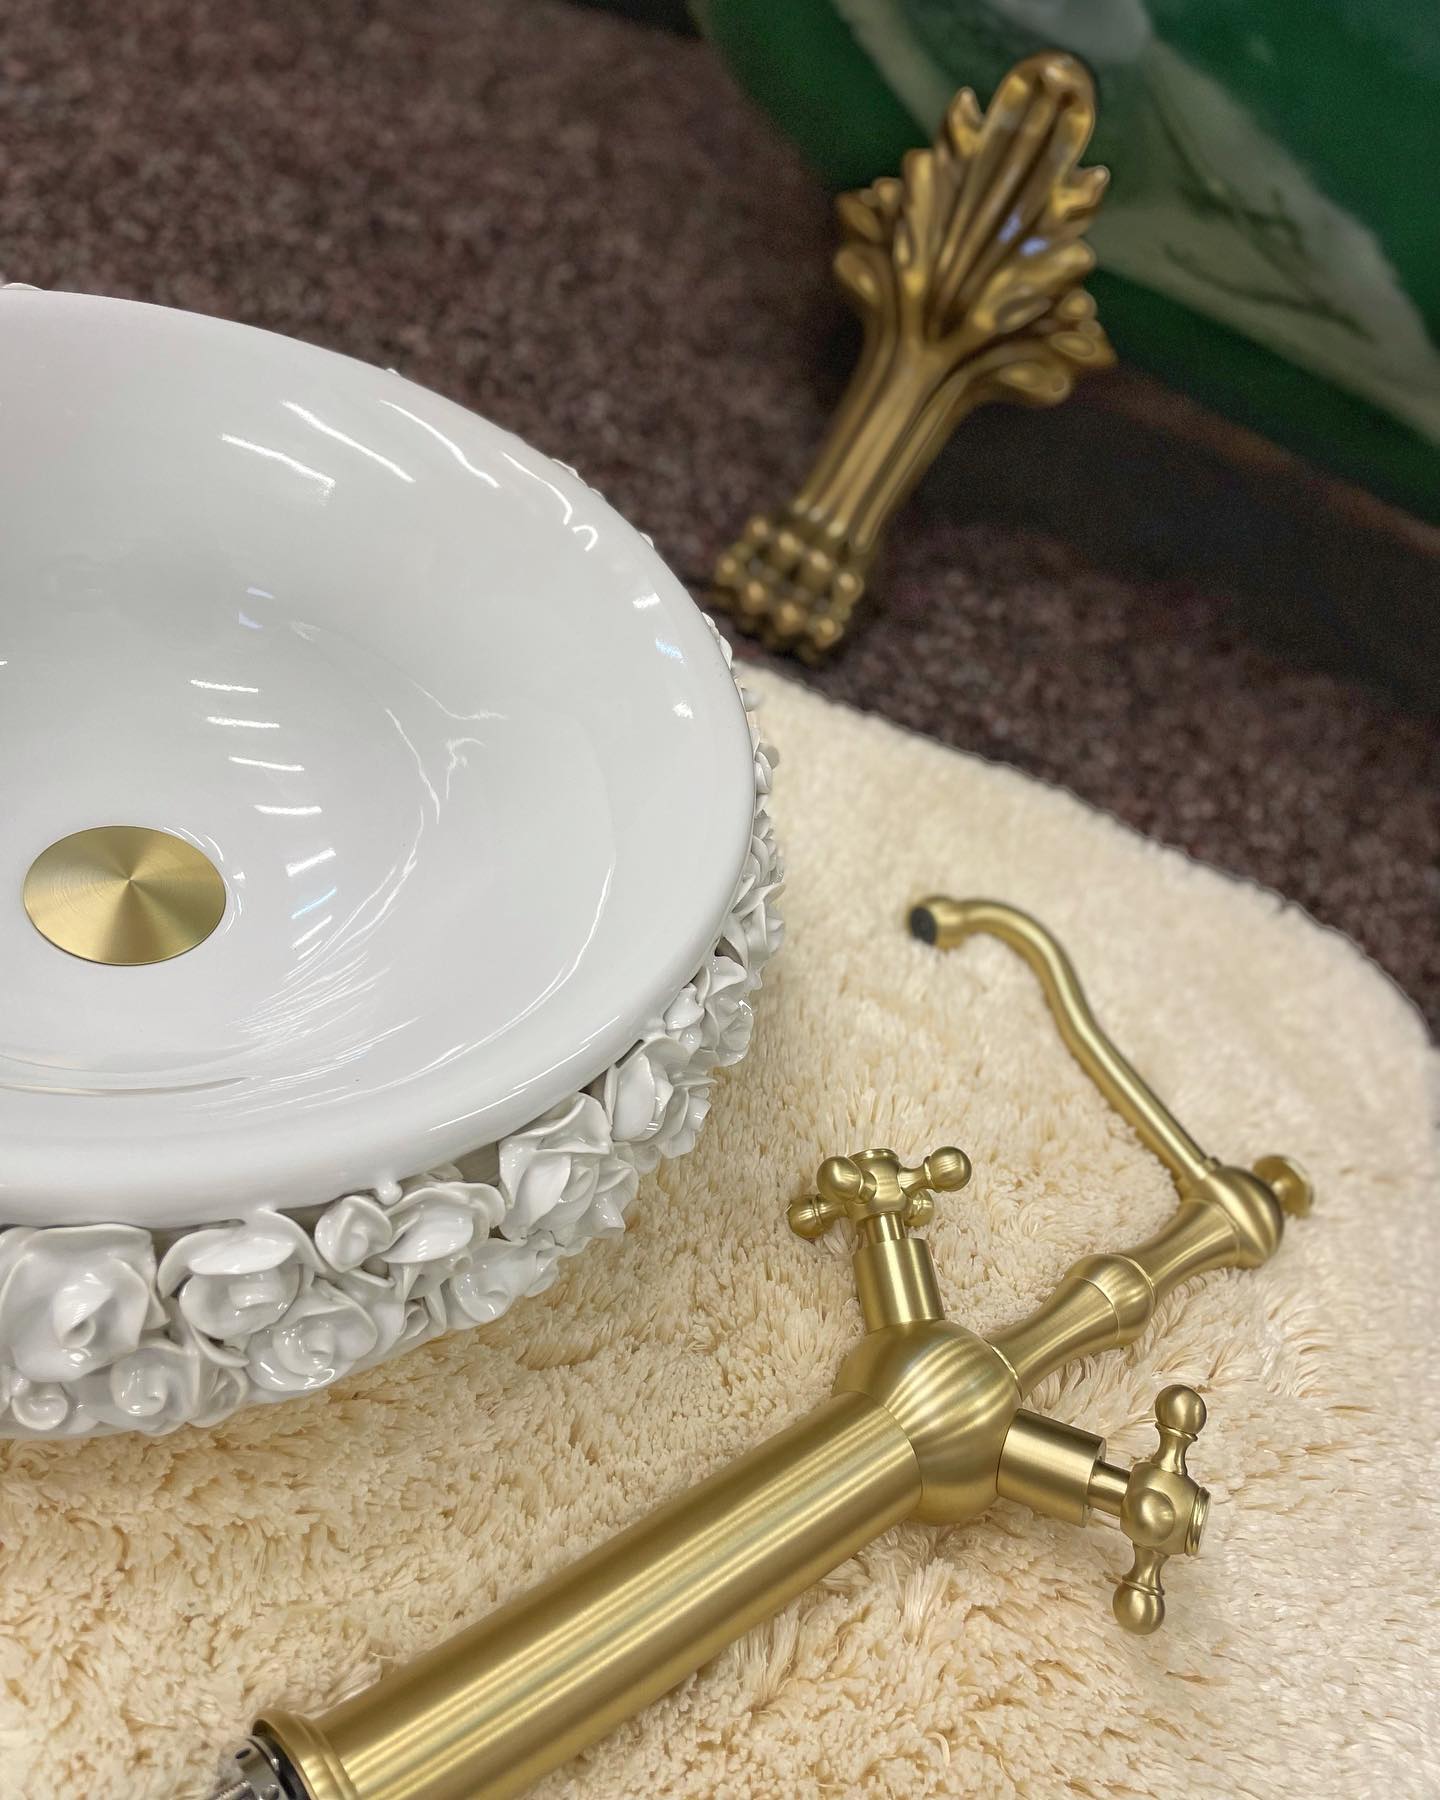 Deira Champagne Gold - Luxury Vessel Sink Faucet - |VESIMI Design| Luxury and Rustic bathrooms online